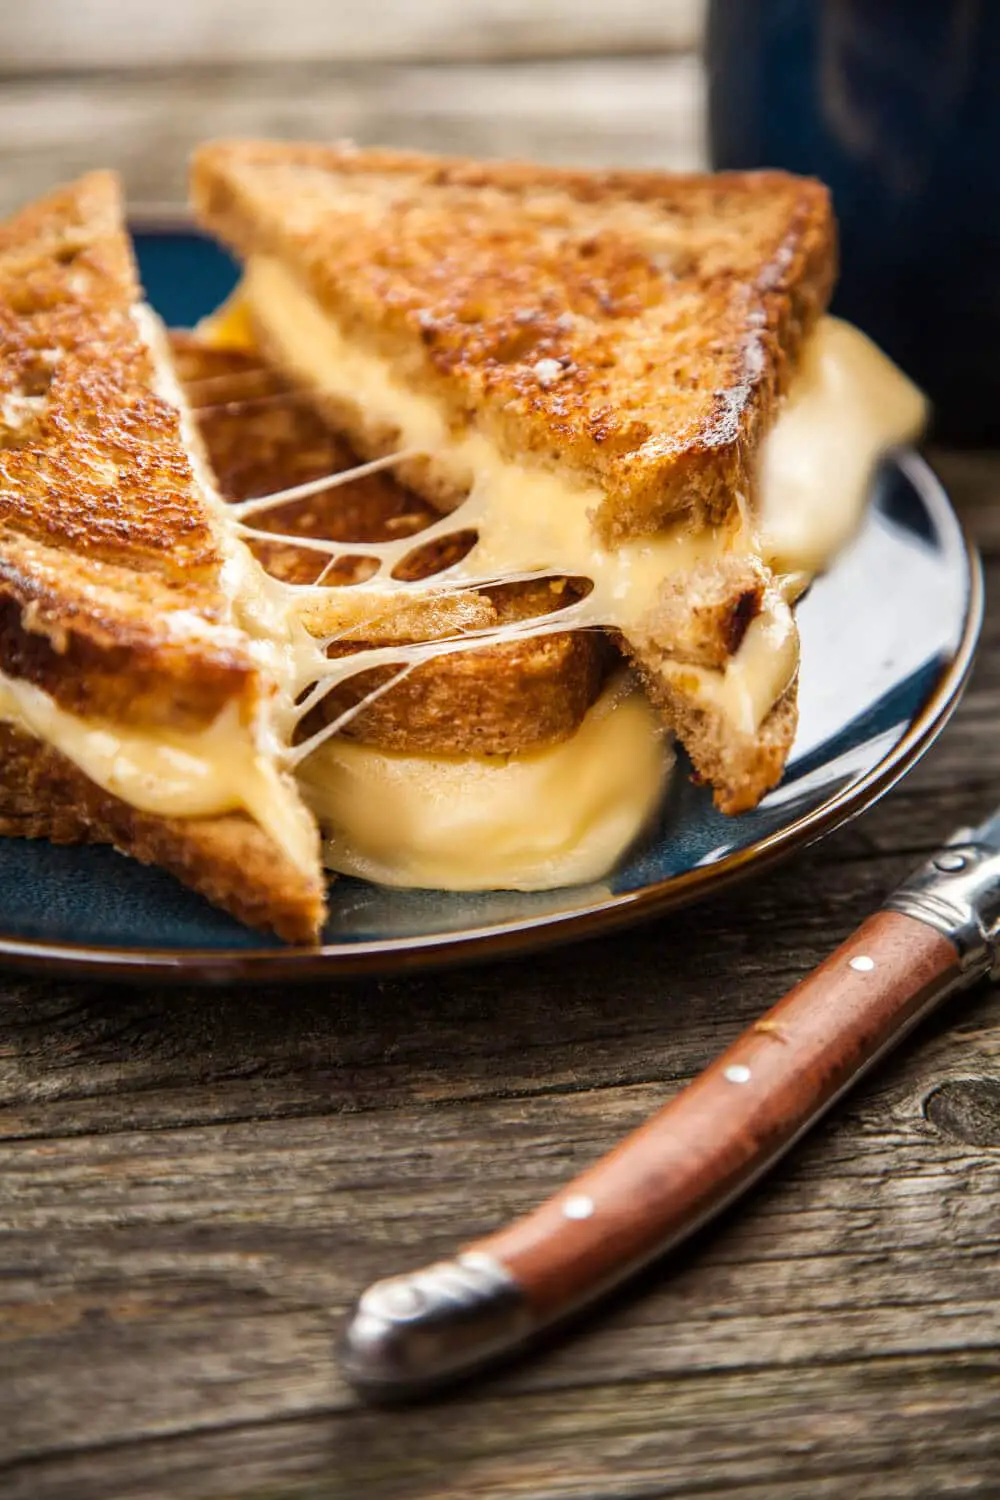 Grilled Cheese Recipe (5 Tips for the Best Grilled Cheese)